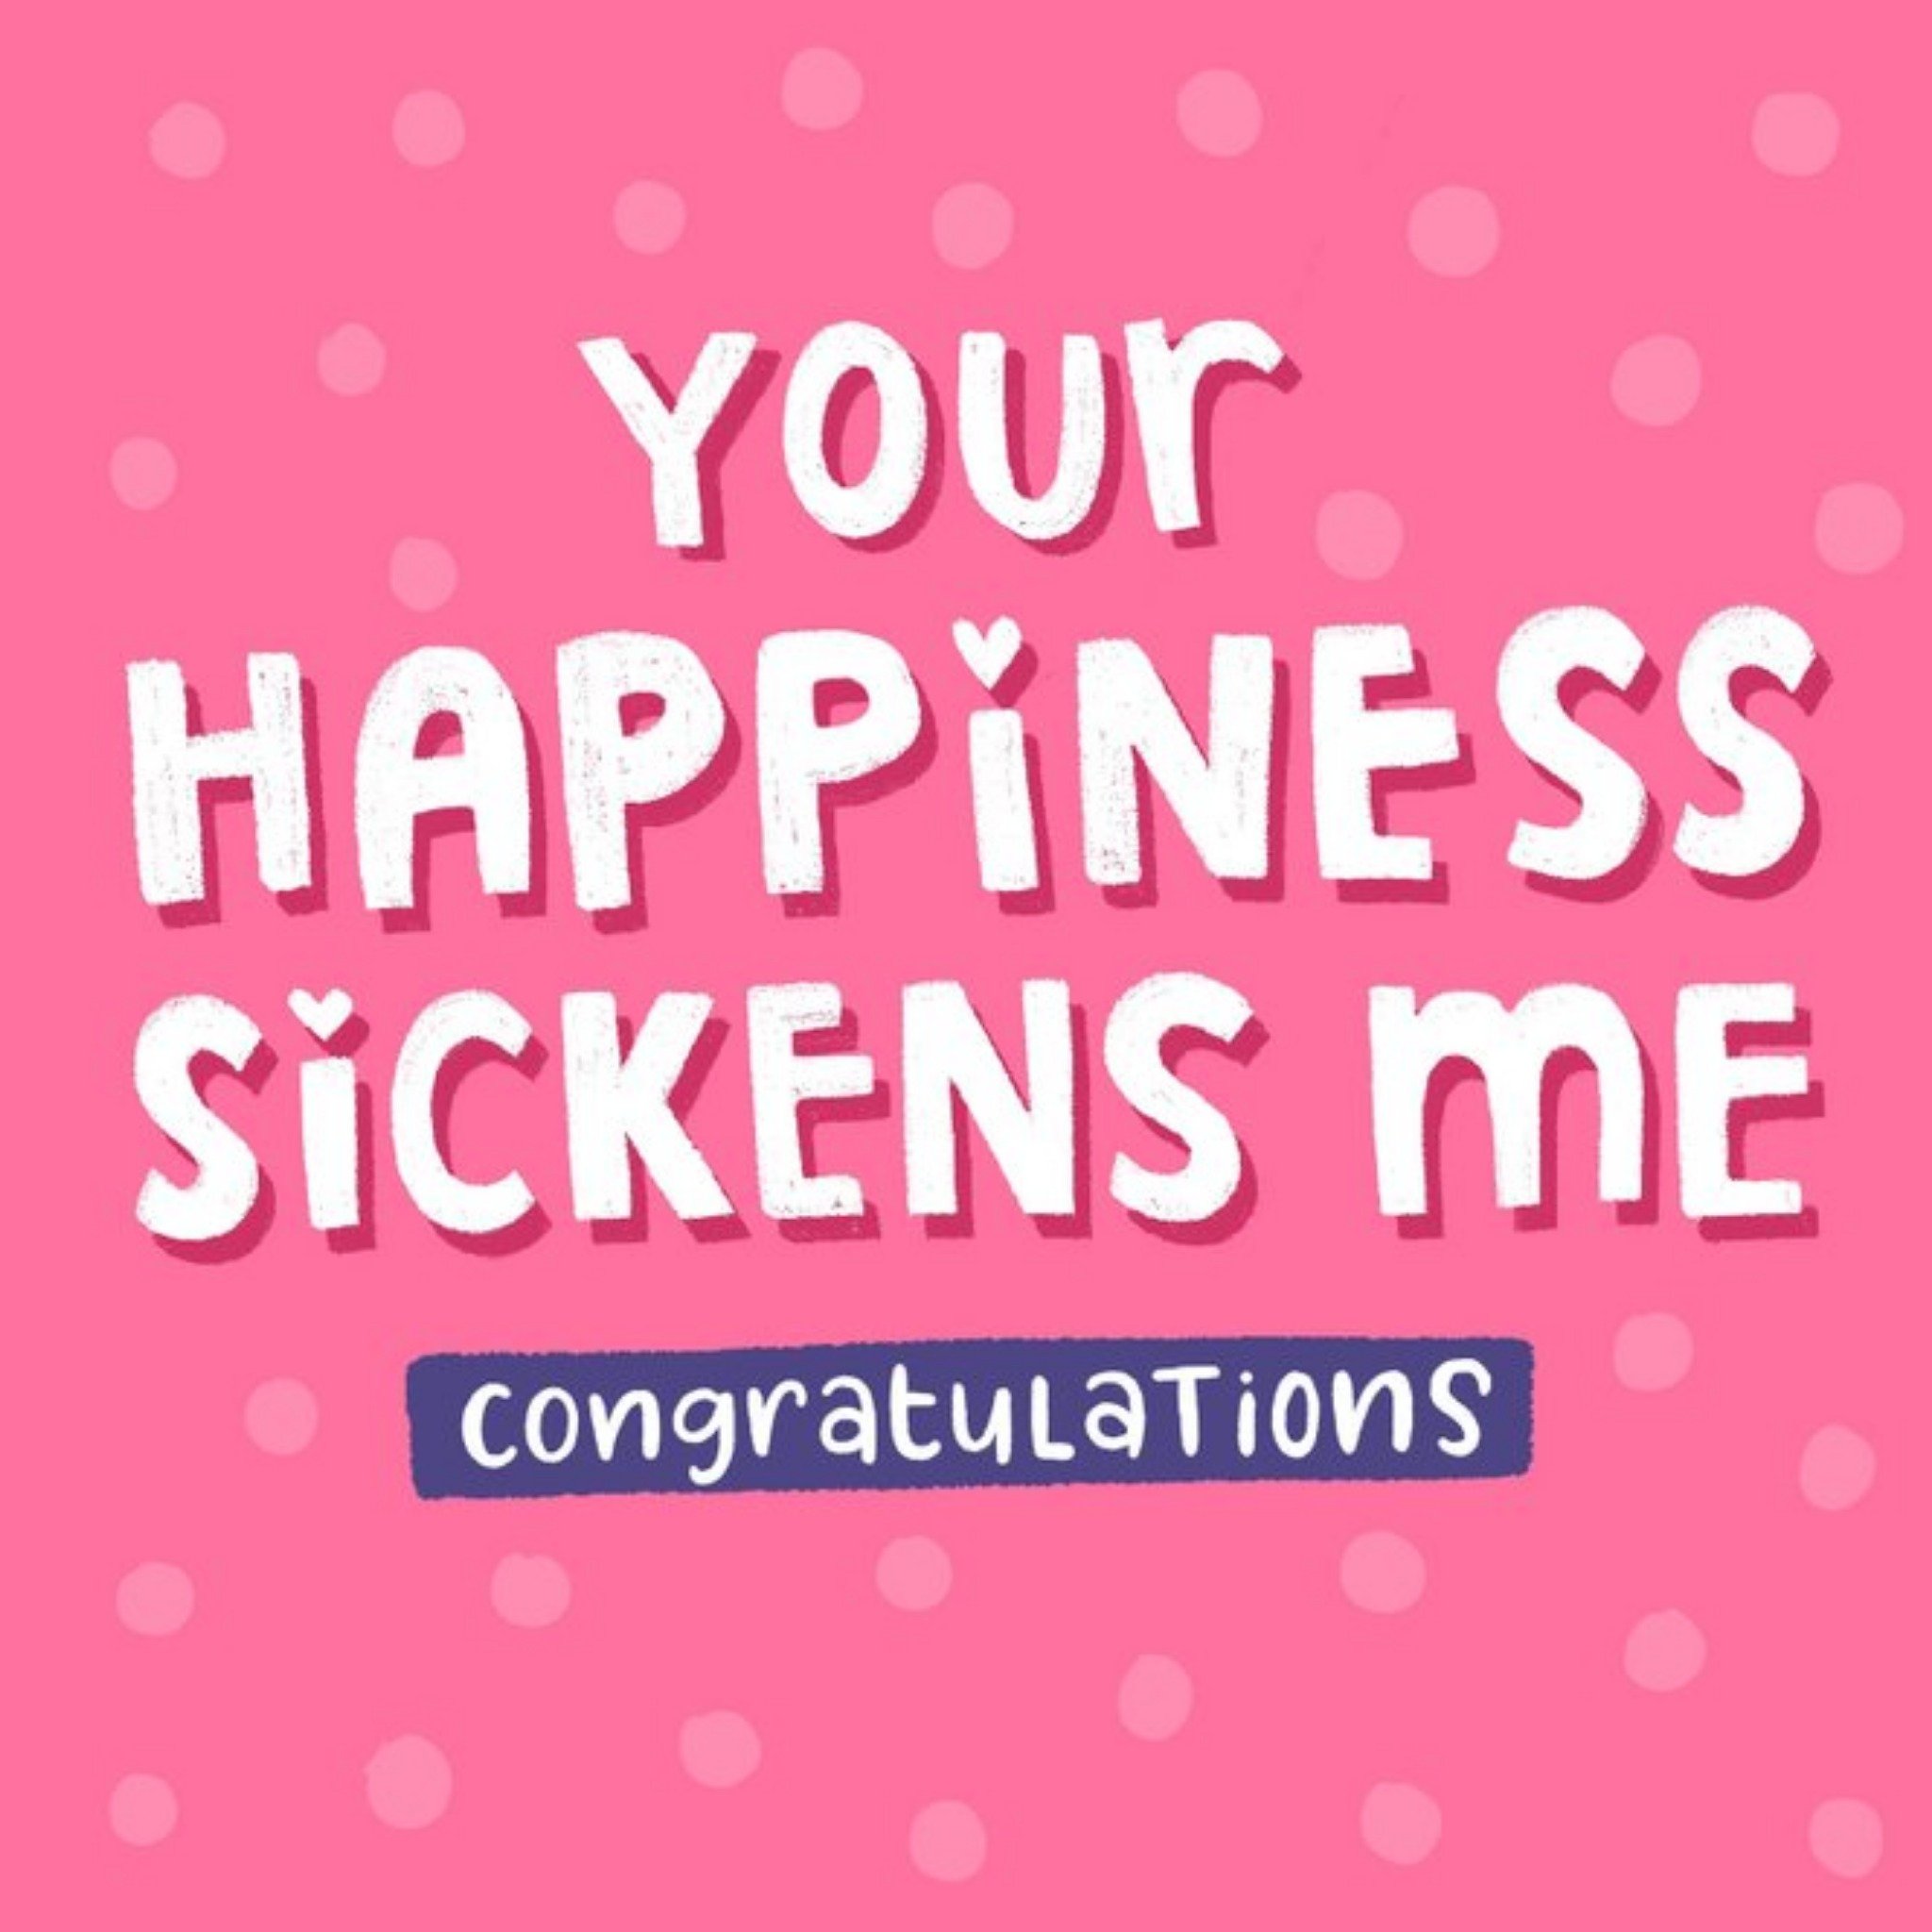 Moonpig Bold White Typography On A Pink Polka Dot Background Cheeky Congratulations Card, Square